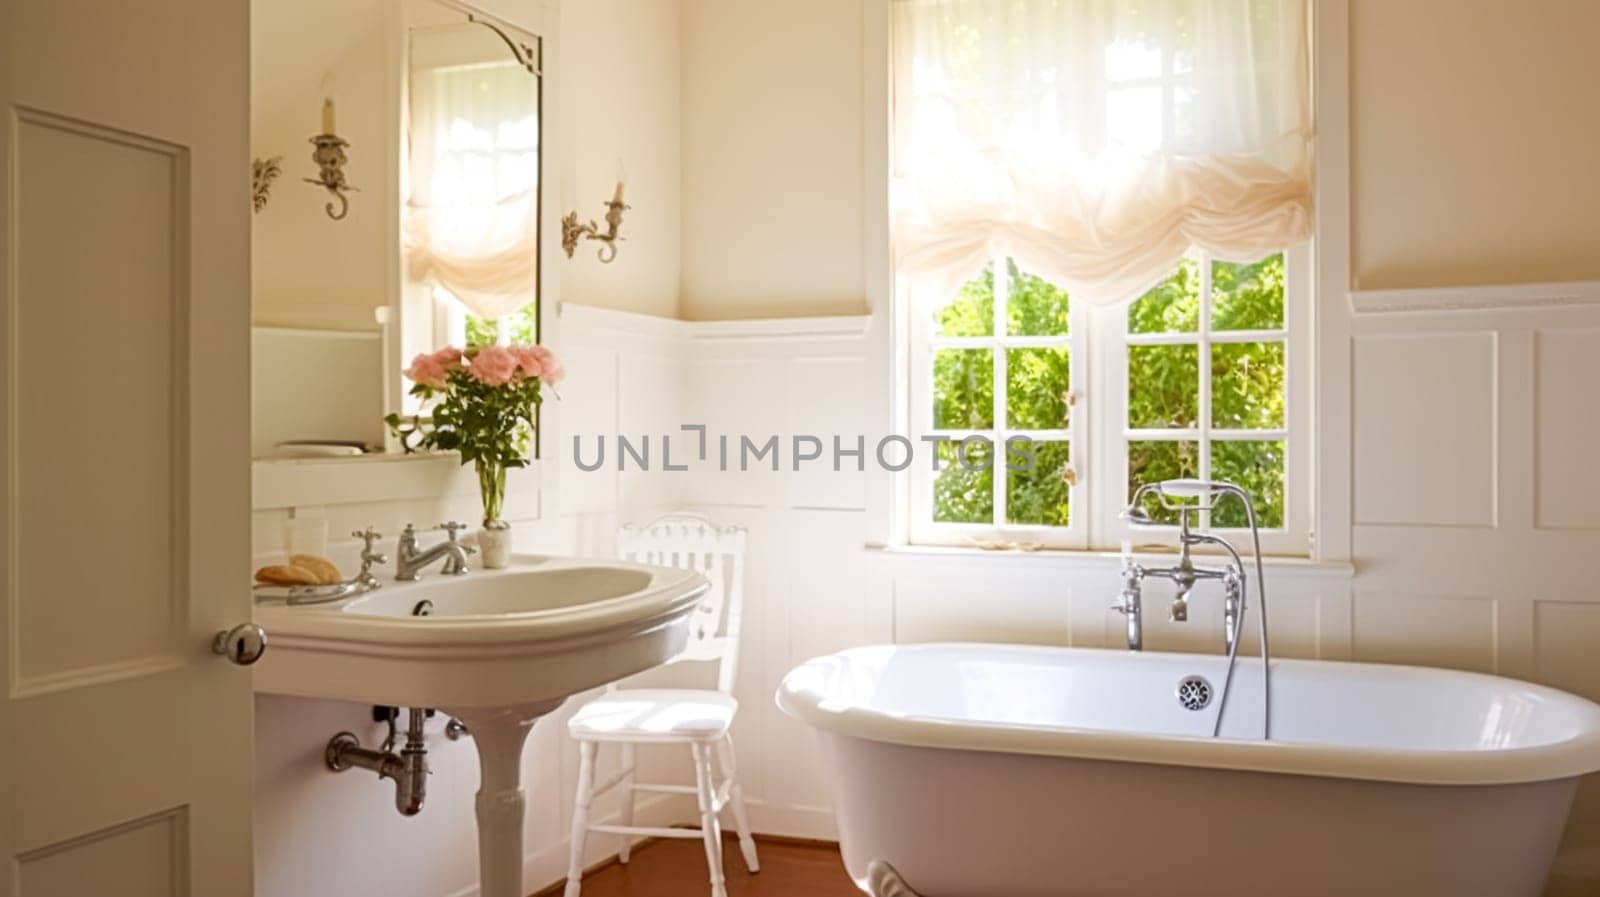 White manor bathroom decor, interior design and home decor, bathtub and bathroom furniture, English country house and cottage style by Anneleven